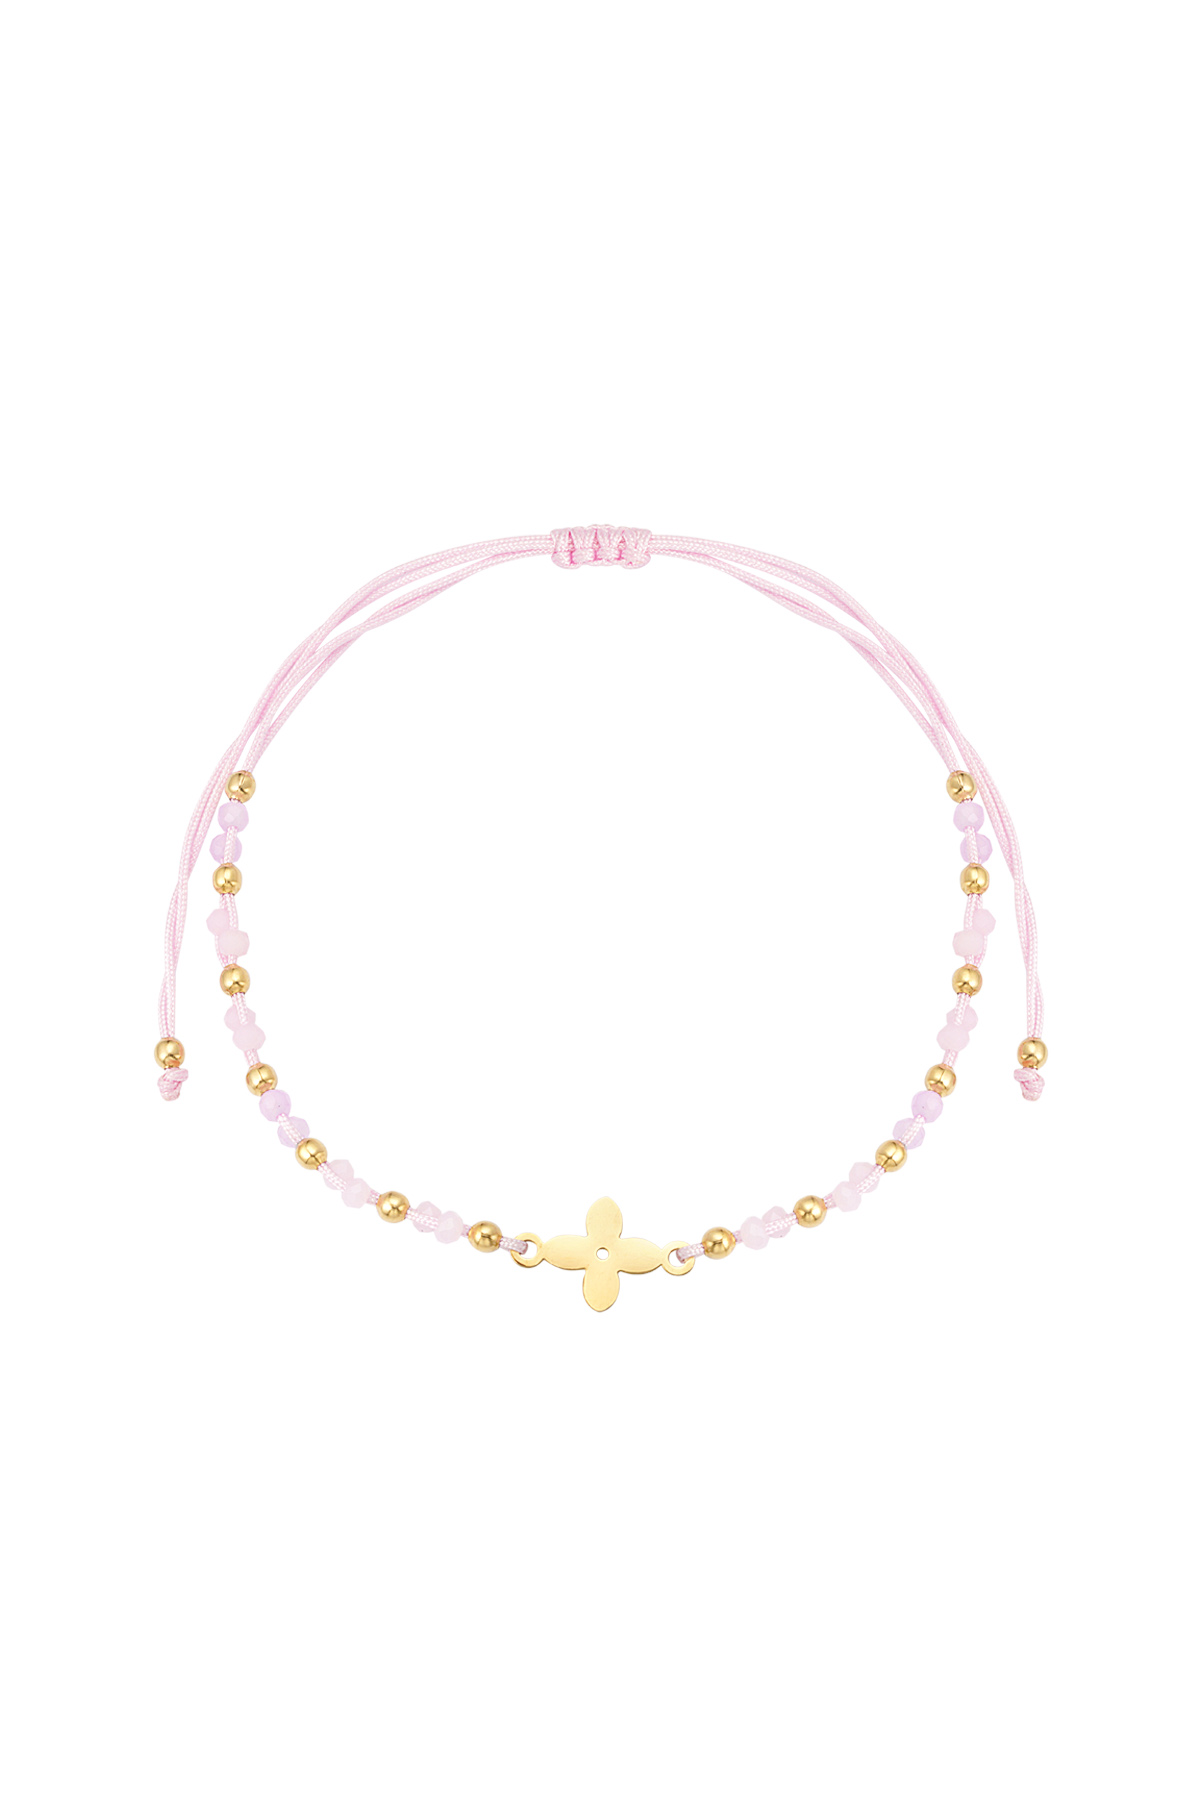 summer bracelet with beads - pink / gold h5 